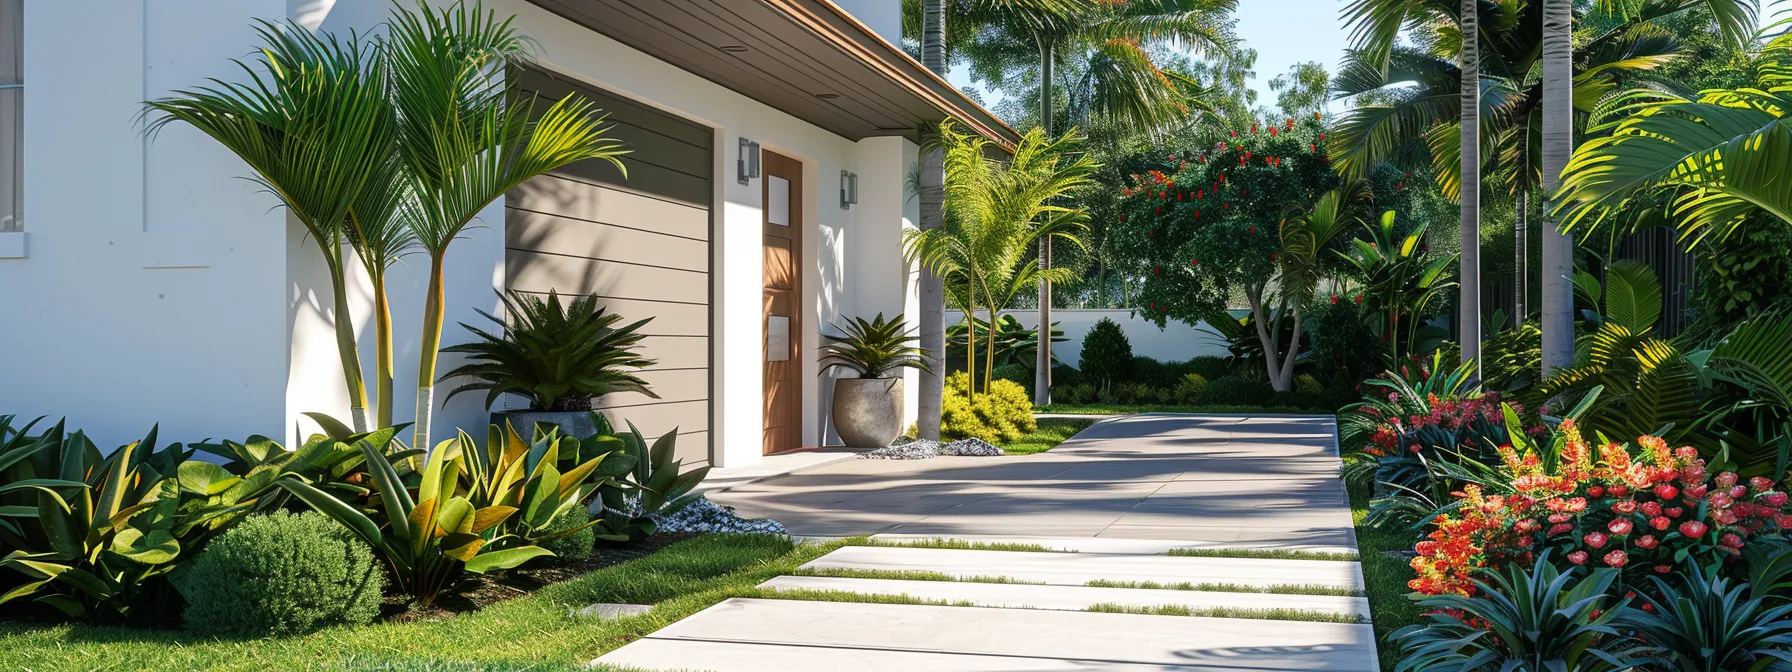 a sunny miami home exterior with well-maintained landscaping and a freshly painted facade.